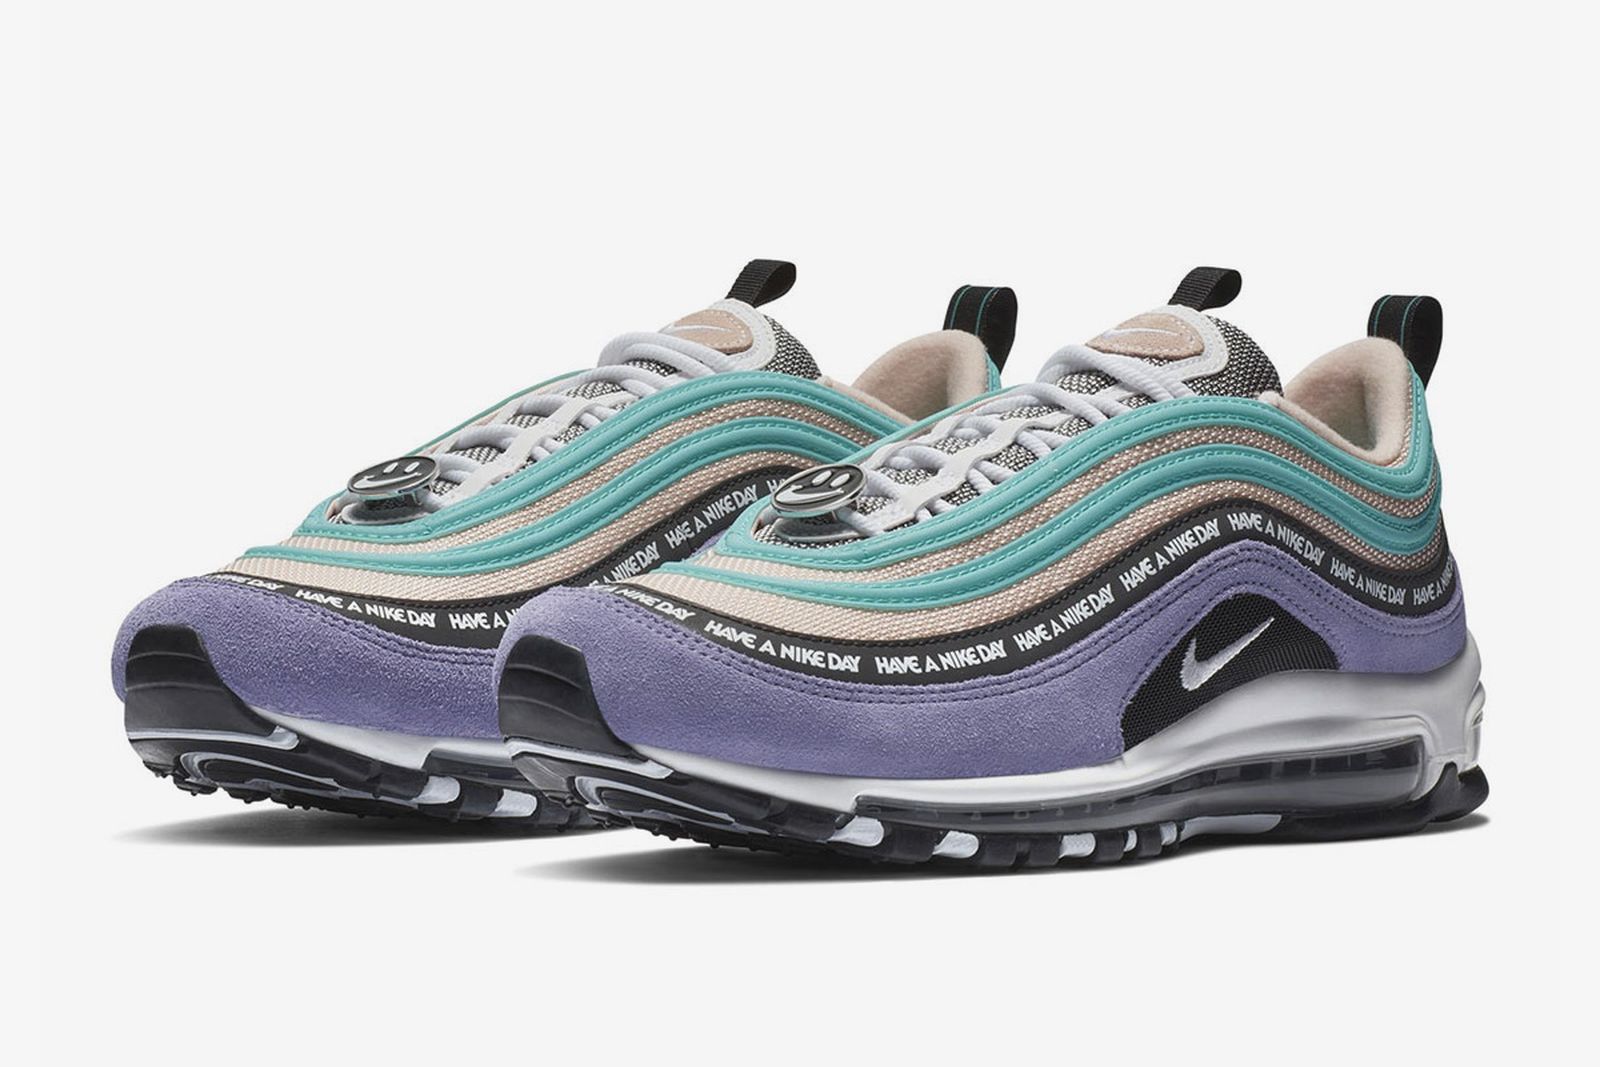 Air Max 97 "Have A Nice Day" Shots Online